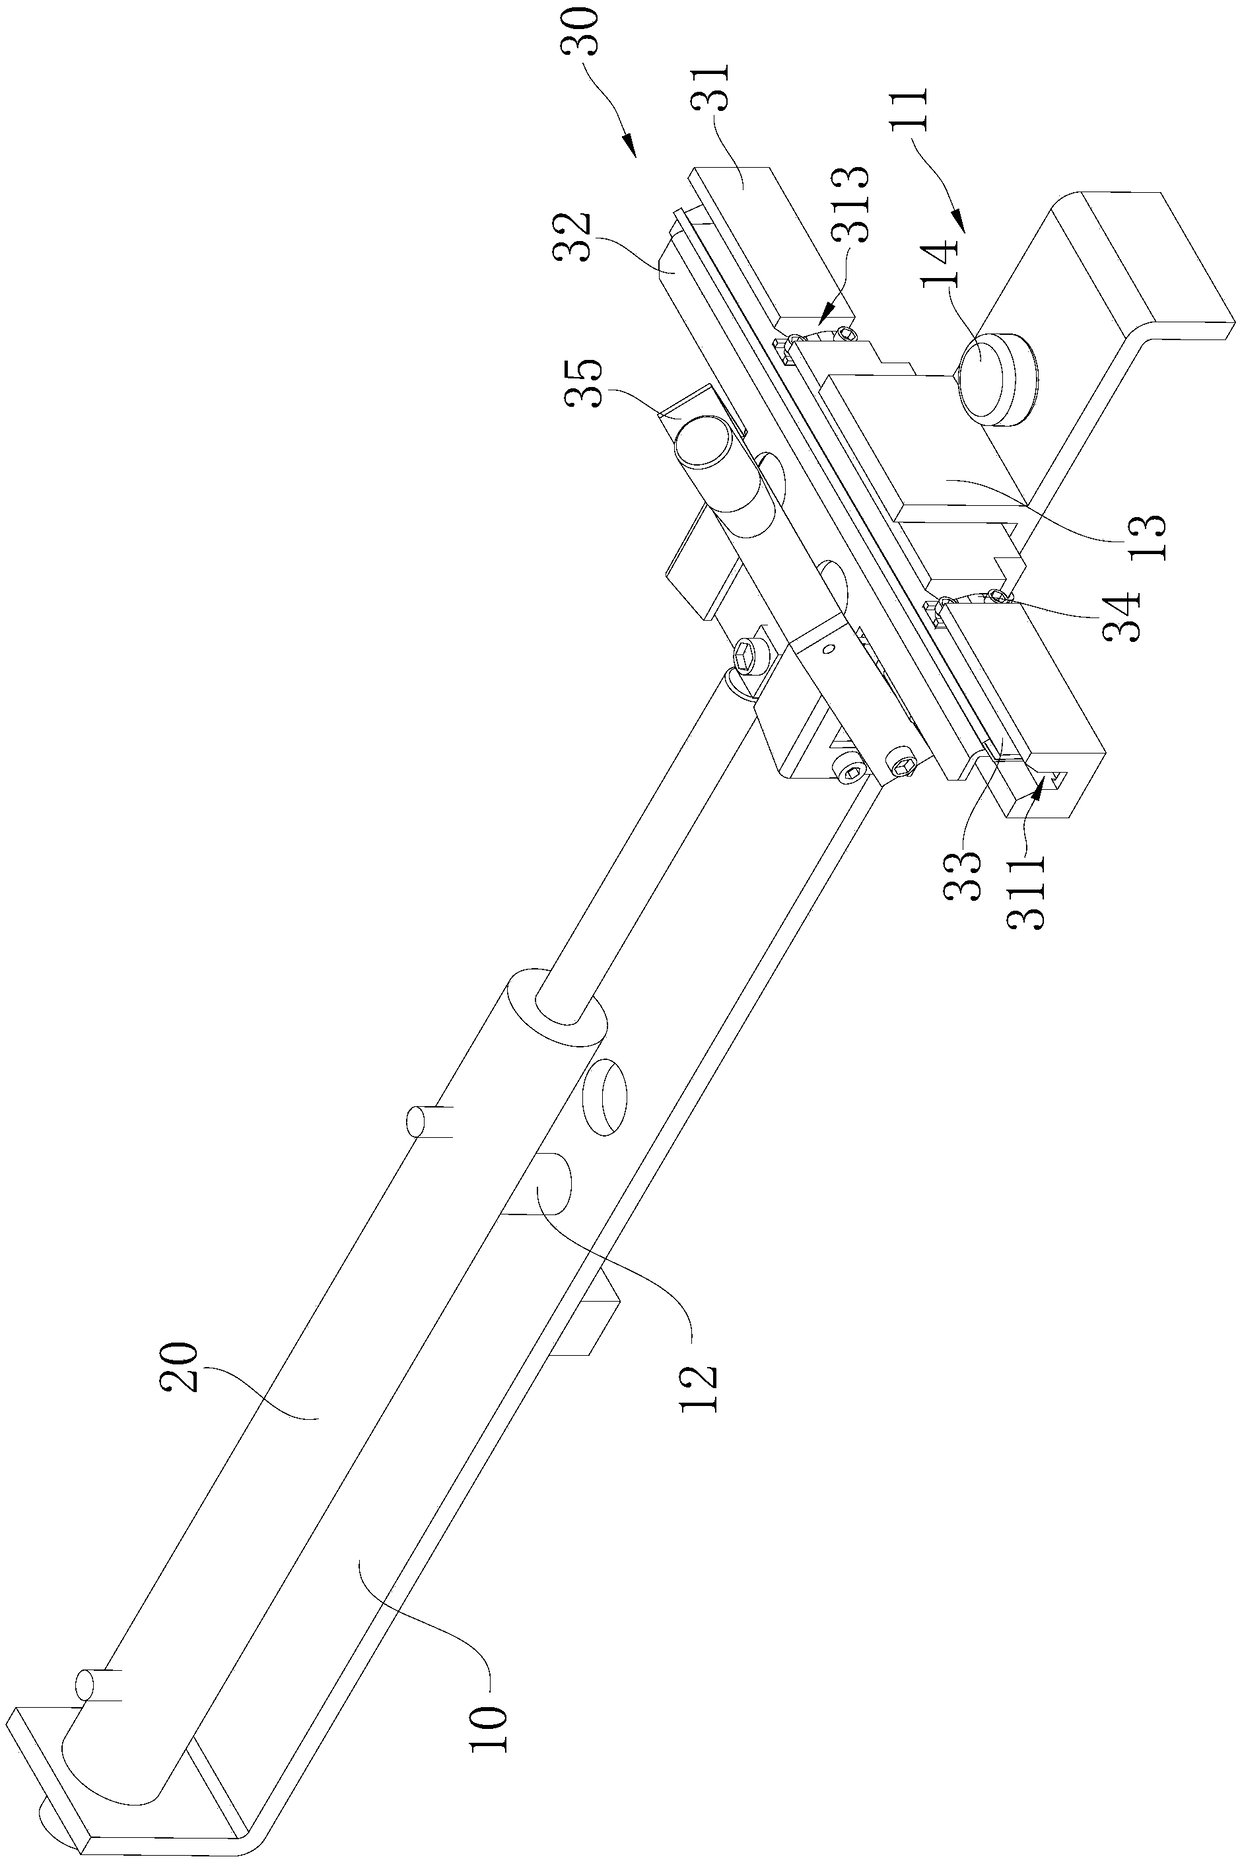 Silk screen production device